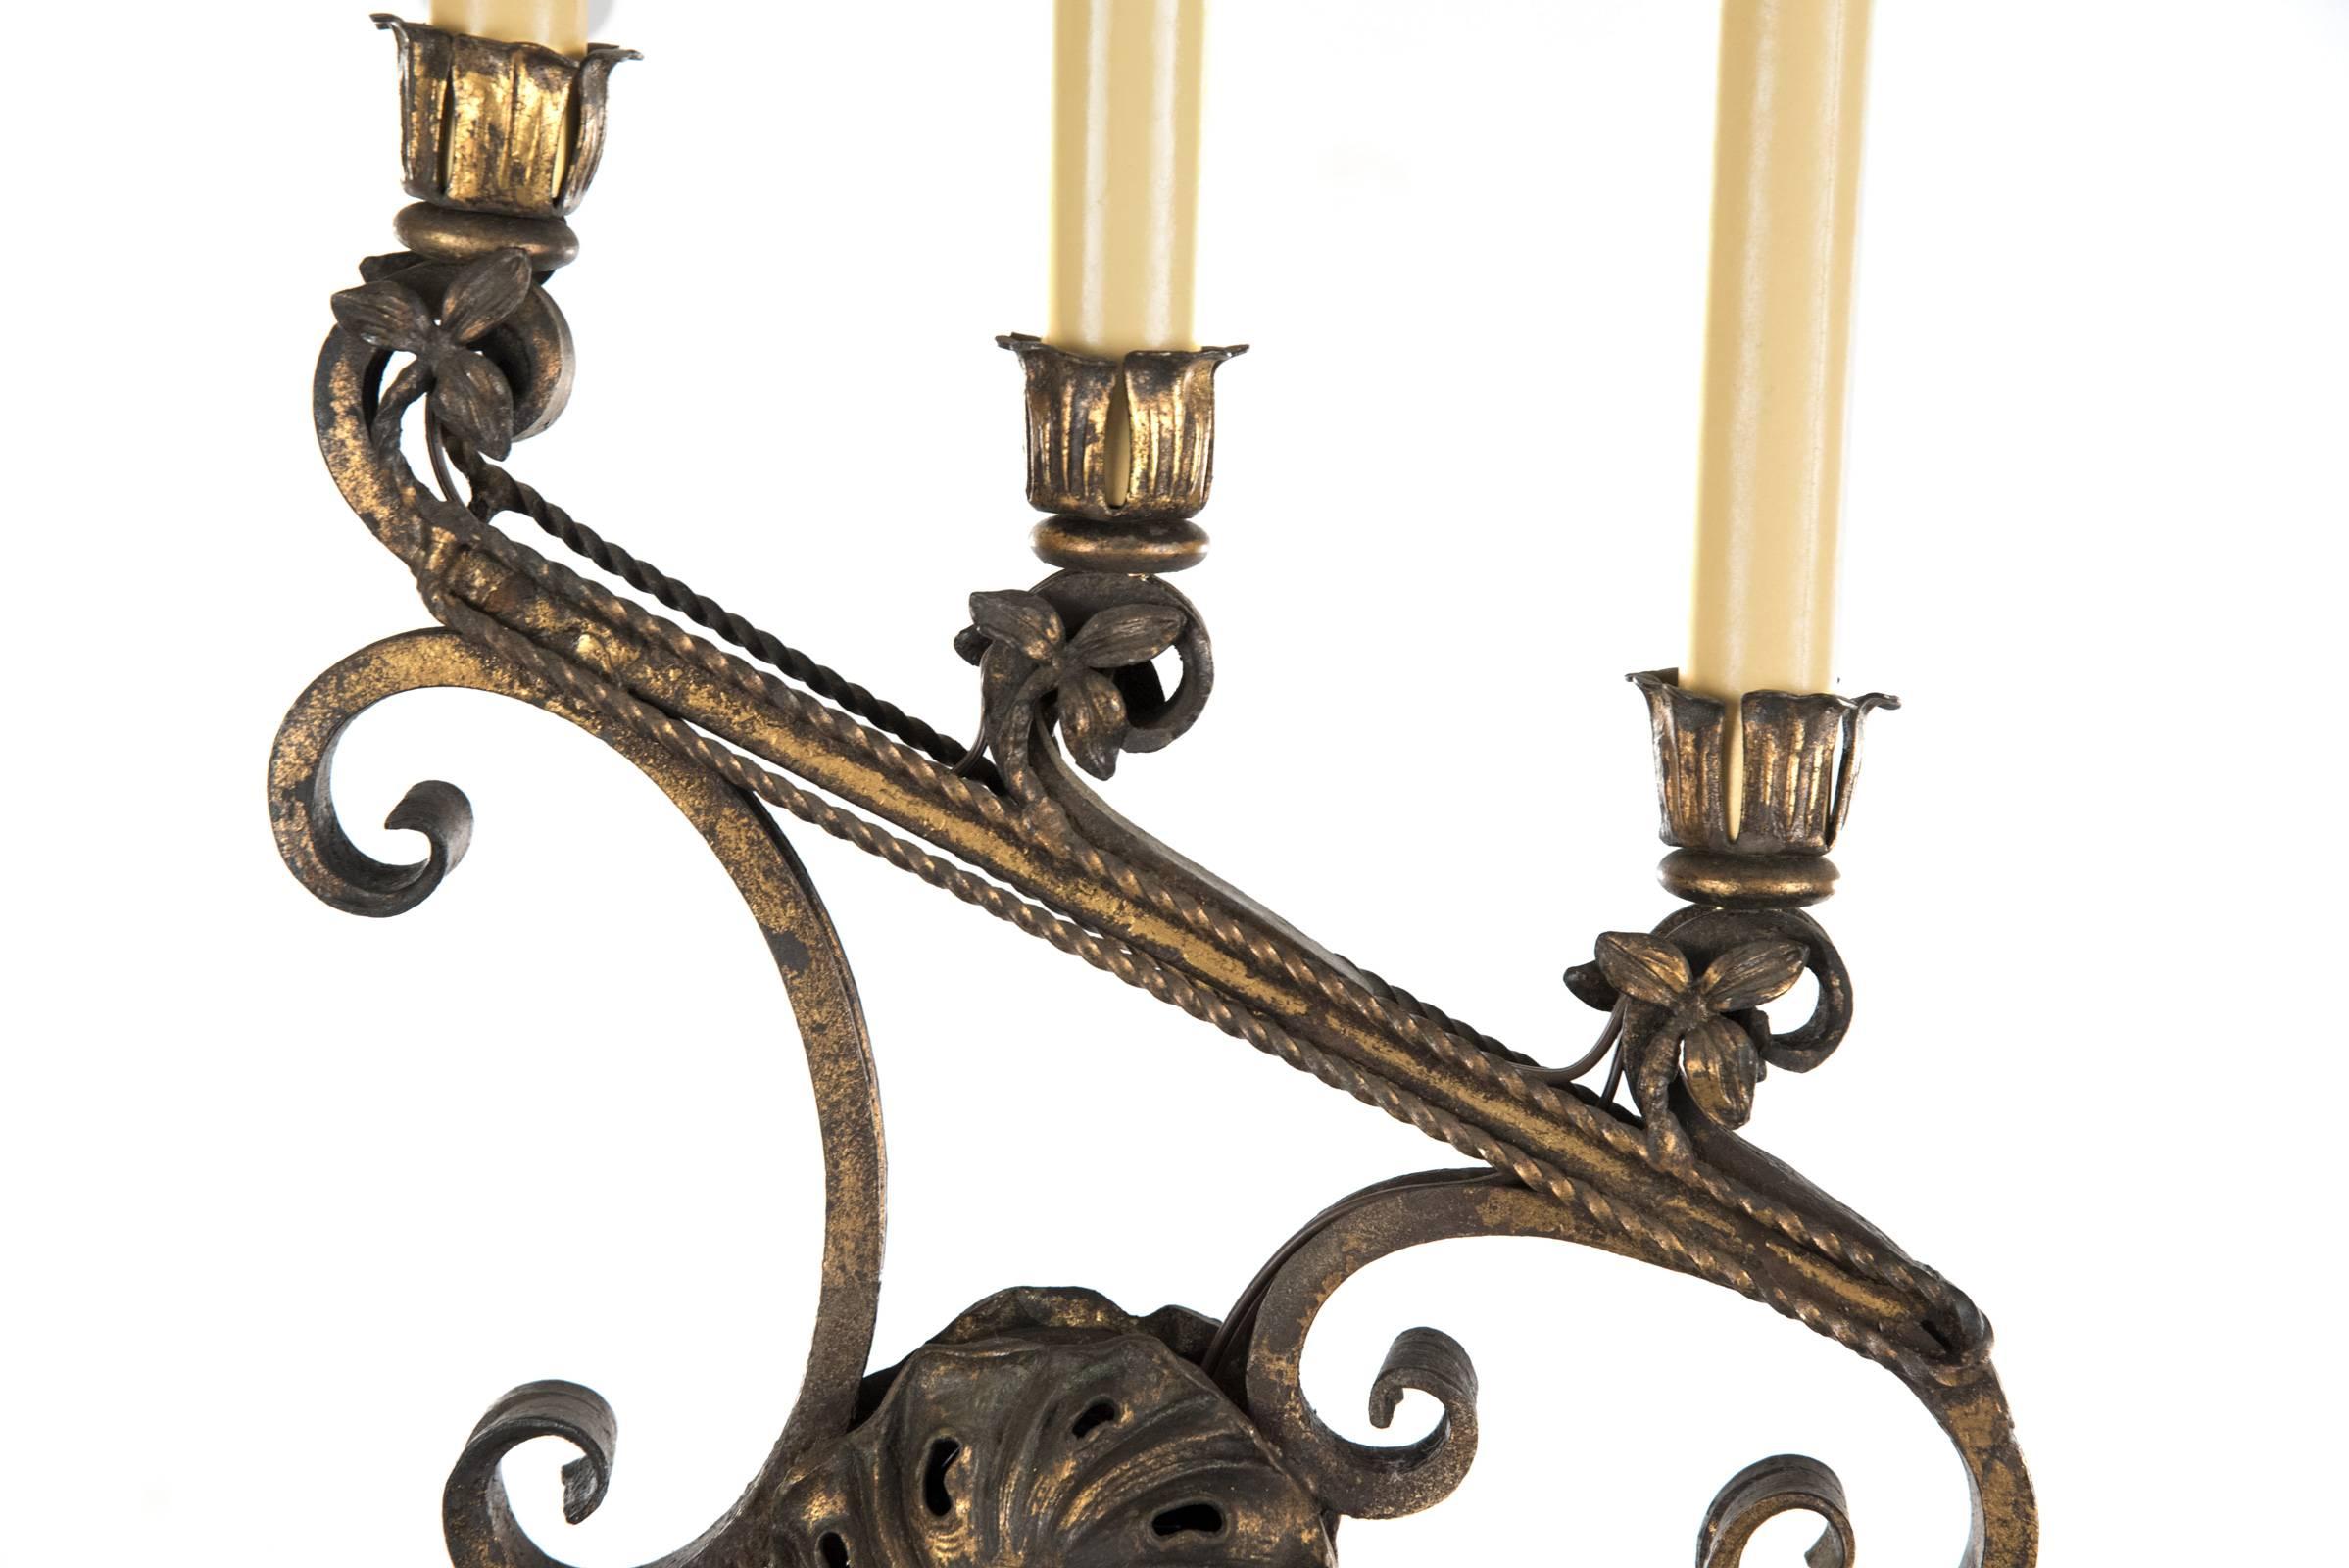 French Pair of Neoclassical Candelabra Floor Lamps